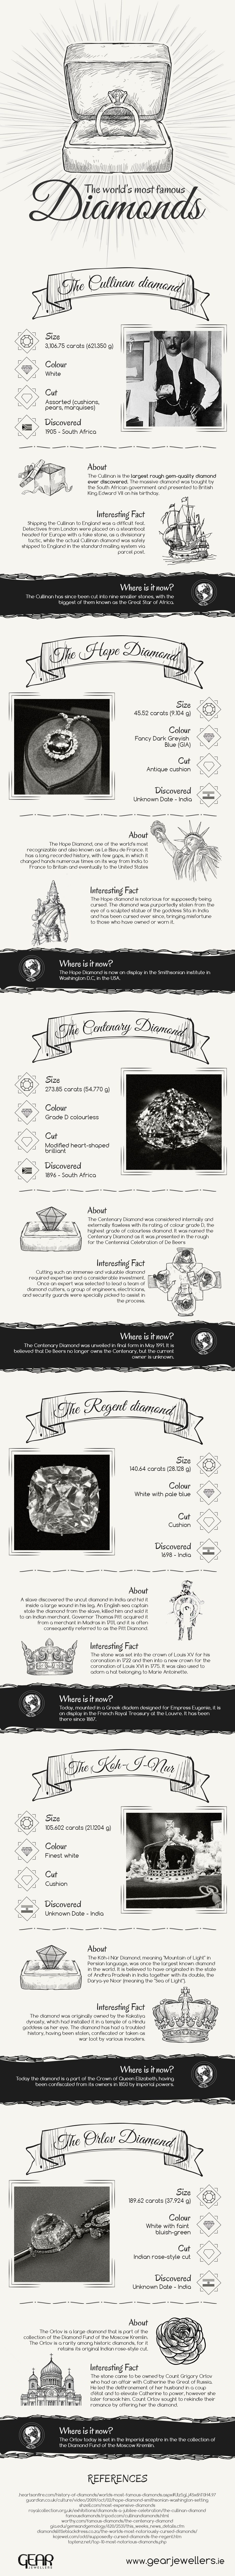 The-worlds-most-famous-diamonds-Infographic